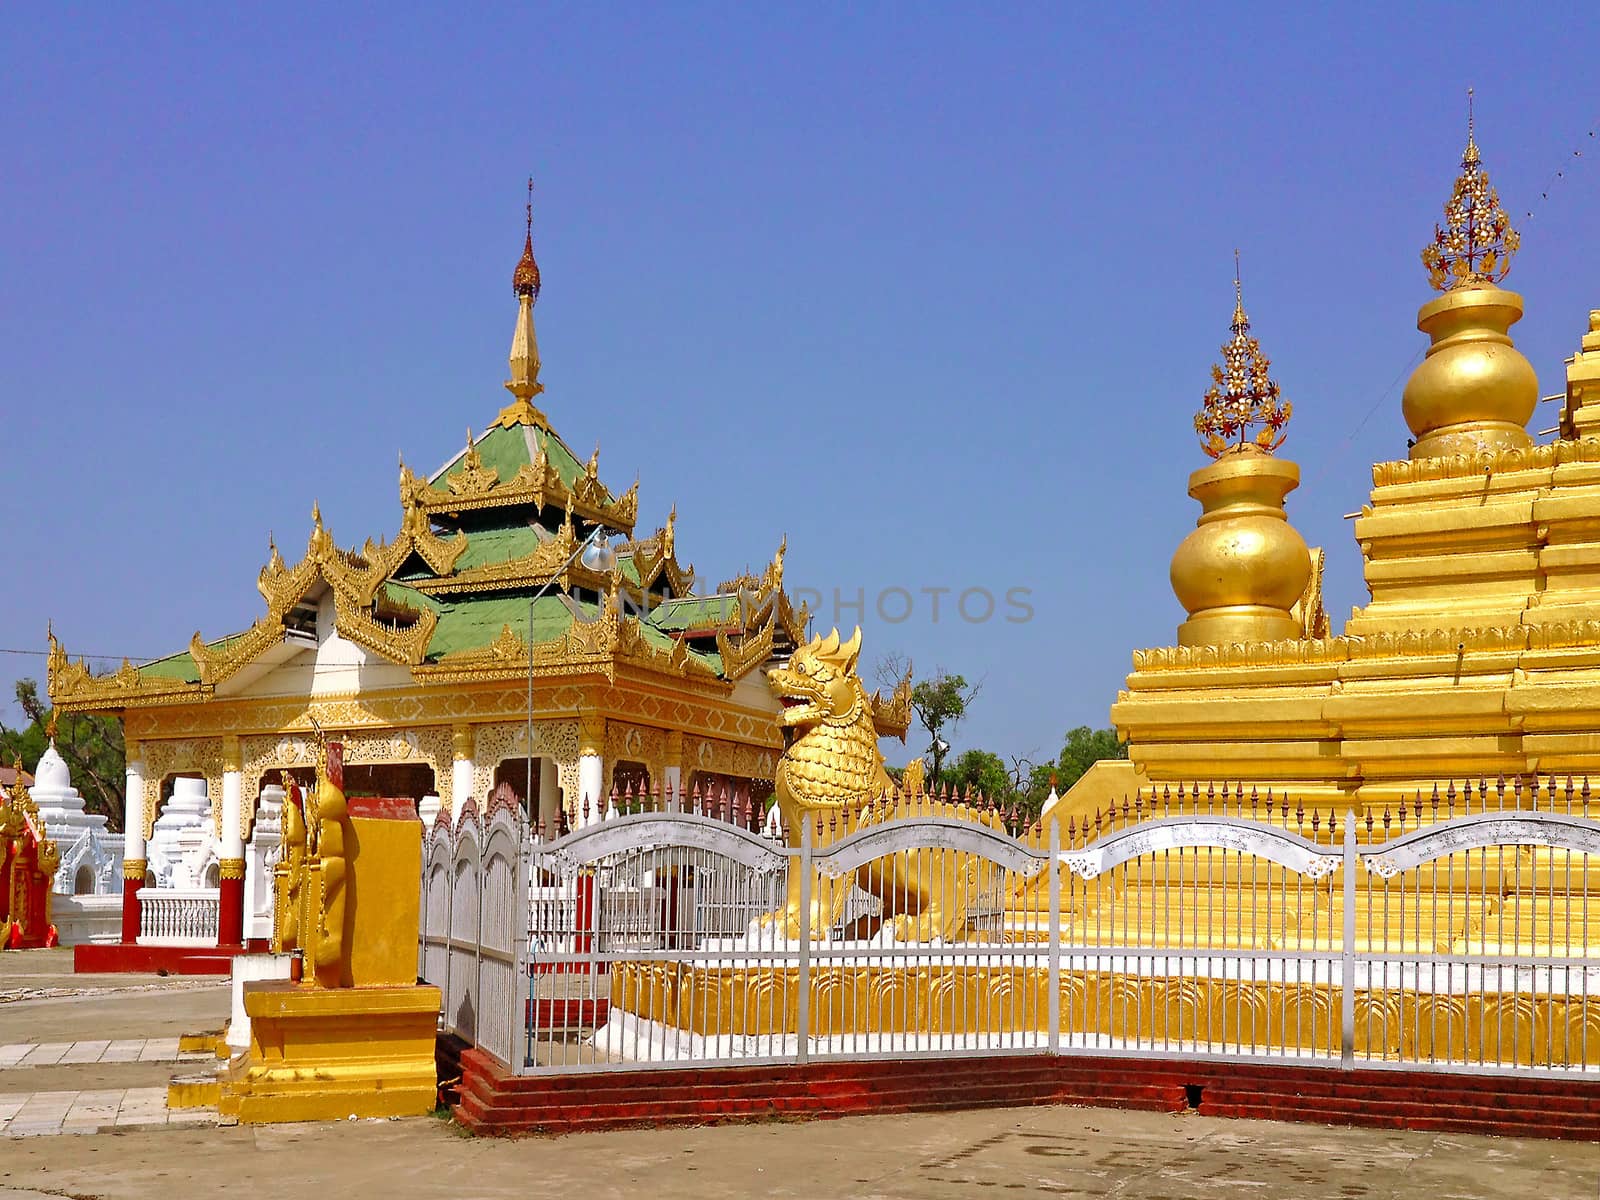 MANDALAY,MYANMAR-APR 19 : Kuthodaw Pagoda is a Buddhist stupa, located in Mandalay, Burma (Myanmar), that contains the world's largest book.This Pagoda was built in 1859 AD on April 19,2013,Mandalay city in Myanmar.